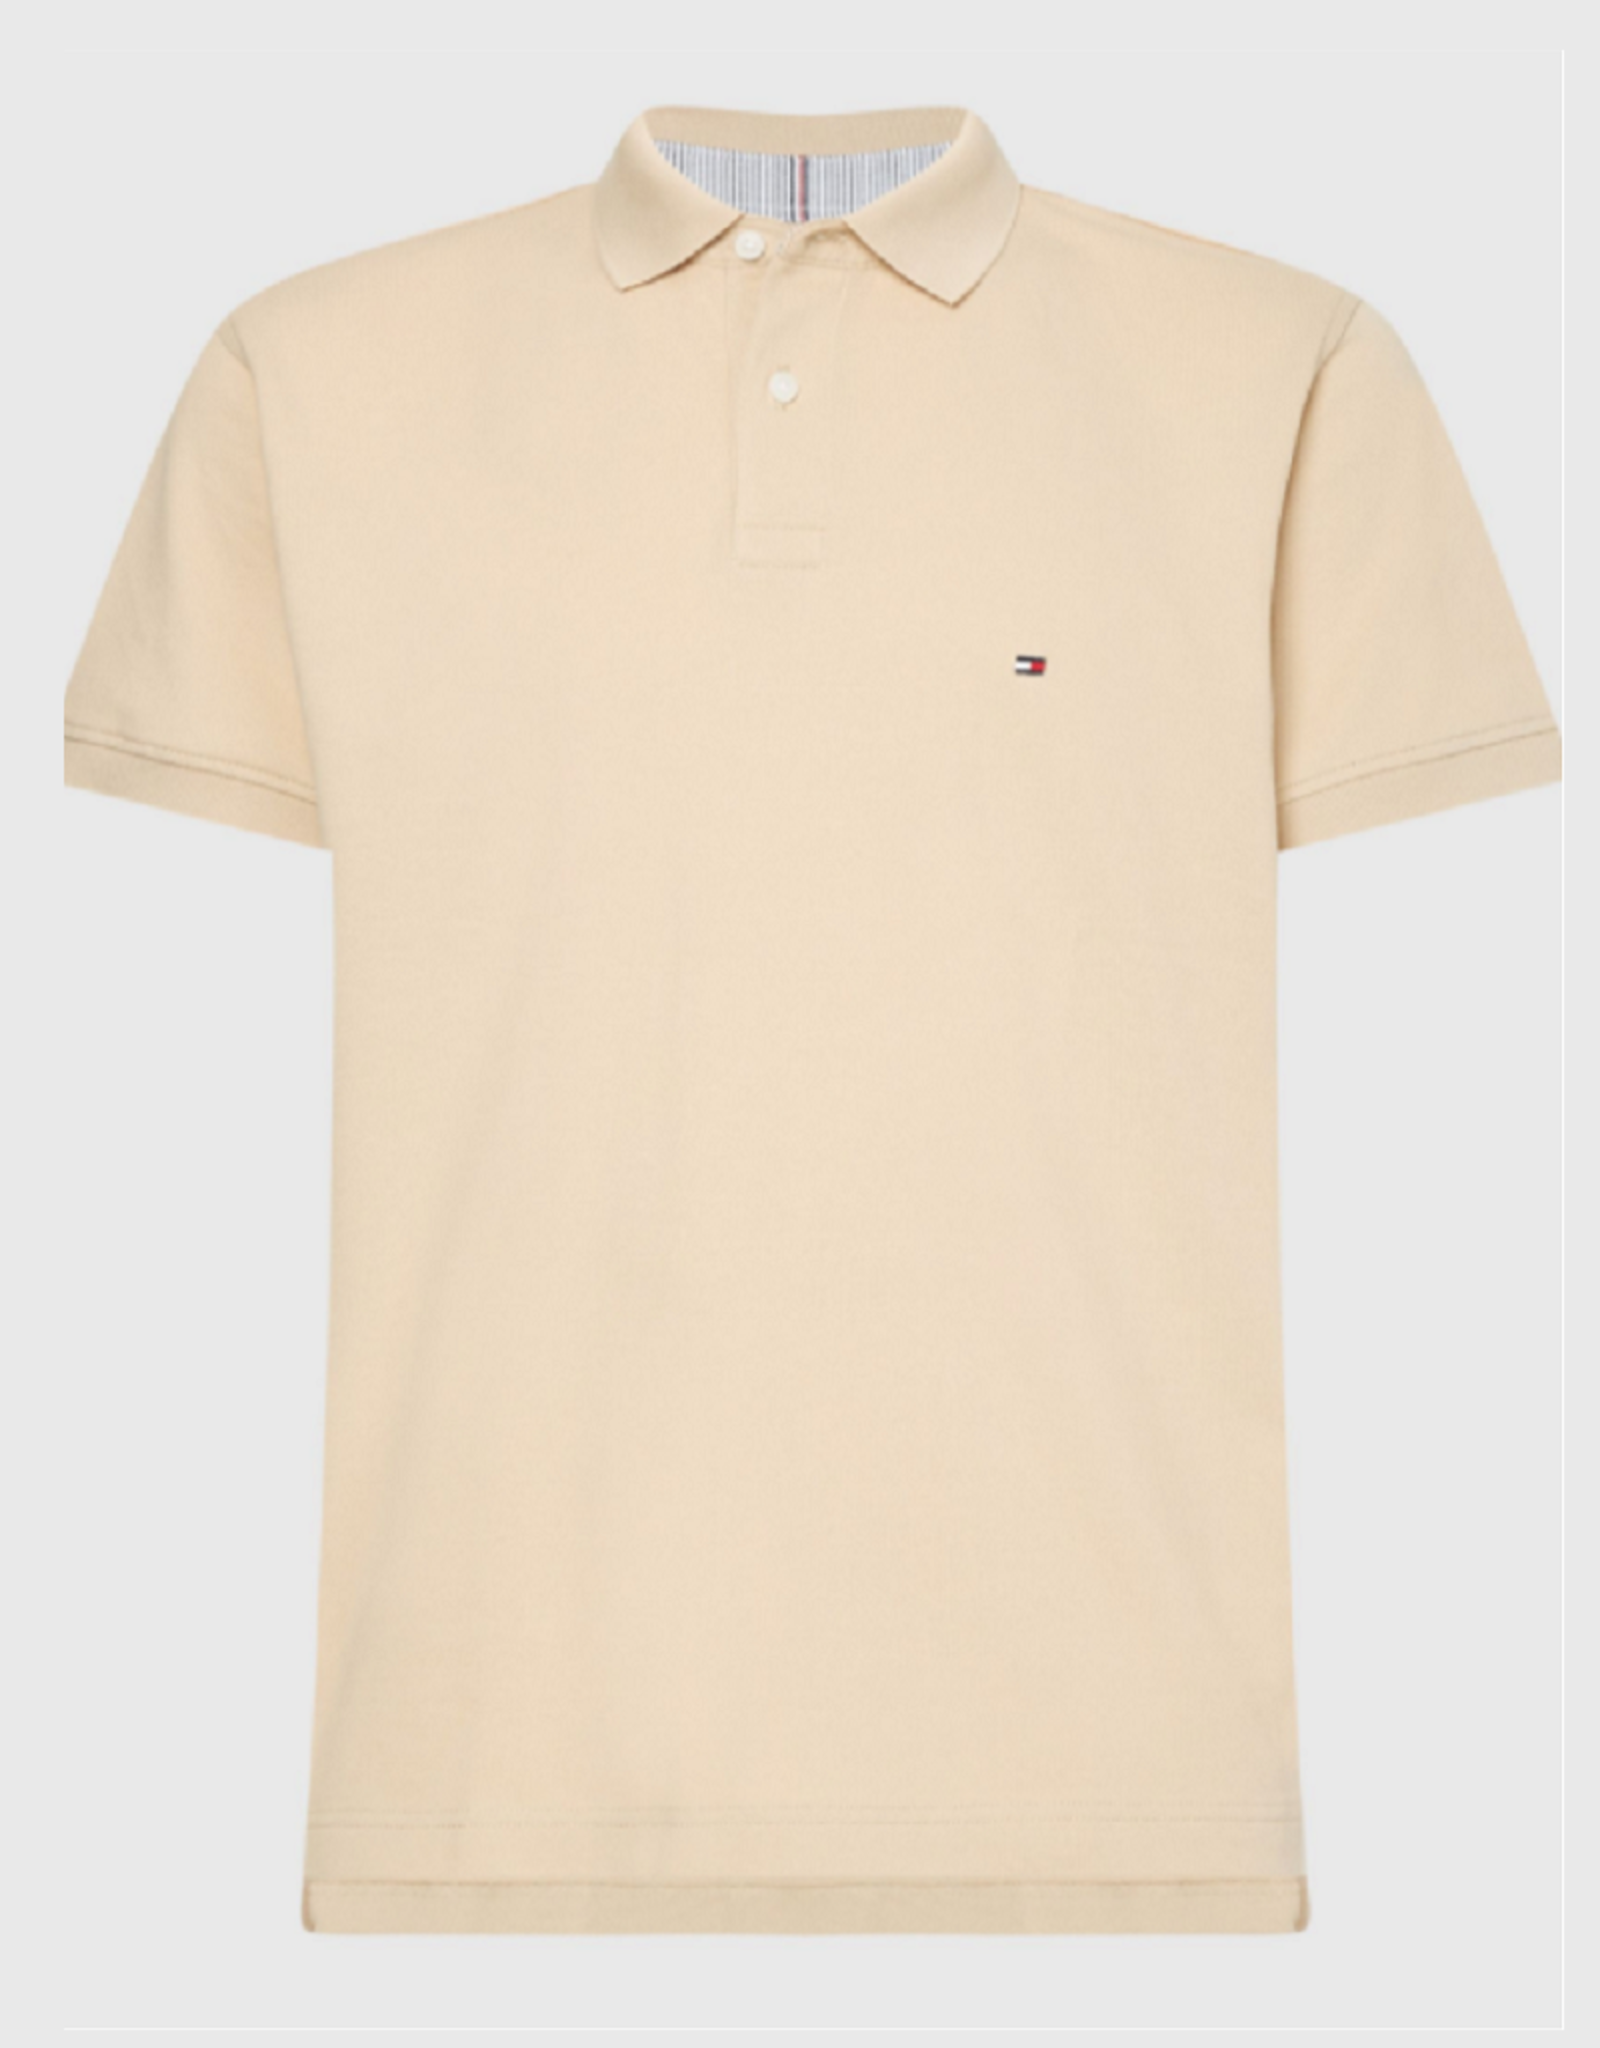 Tommy Hilfiger Tommy Hilfiger polo slim fit  clayed pebble